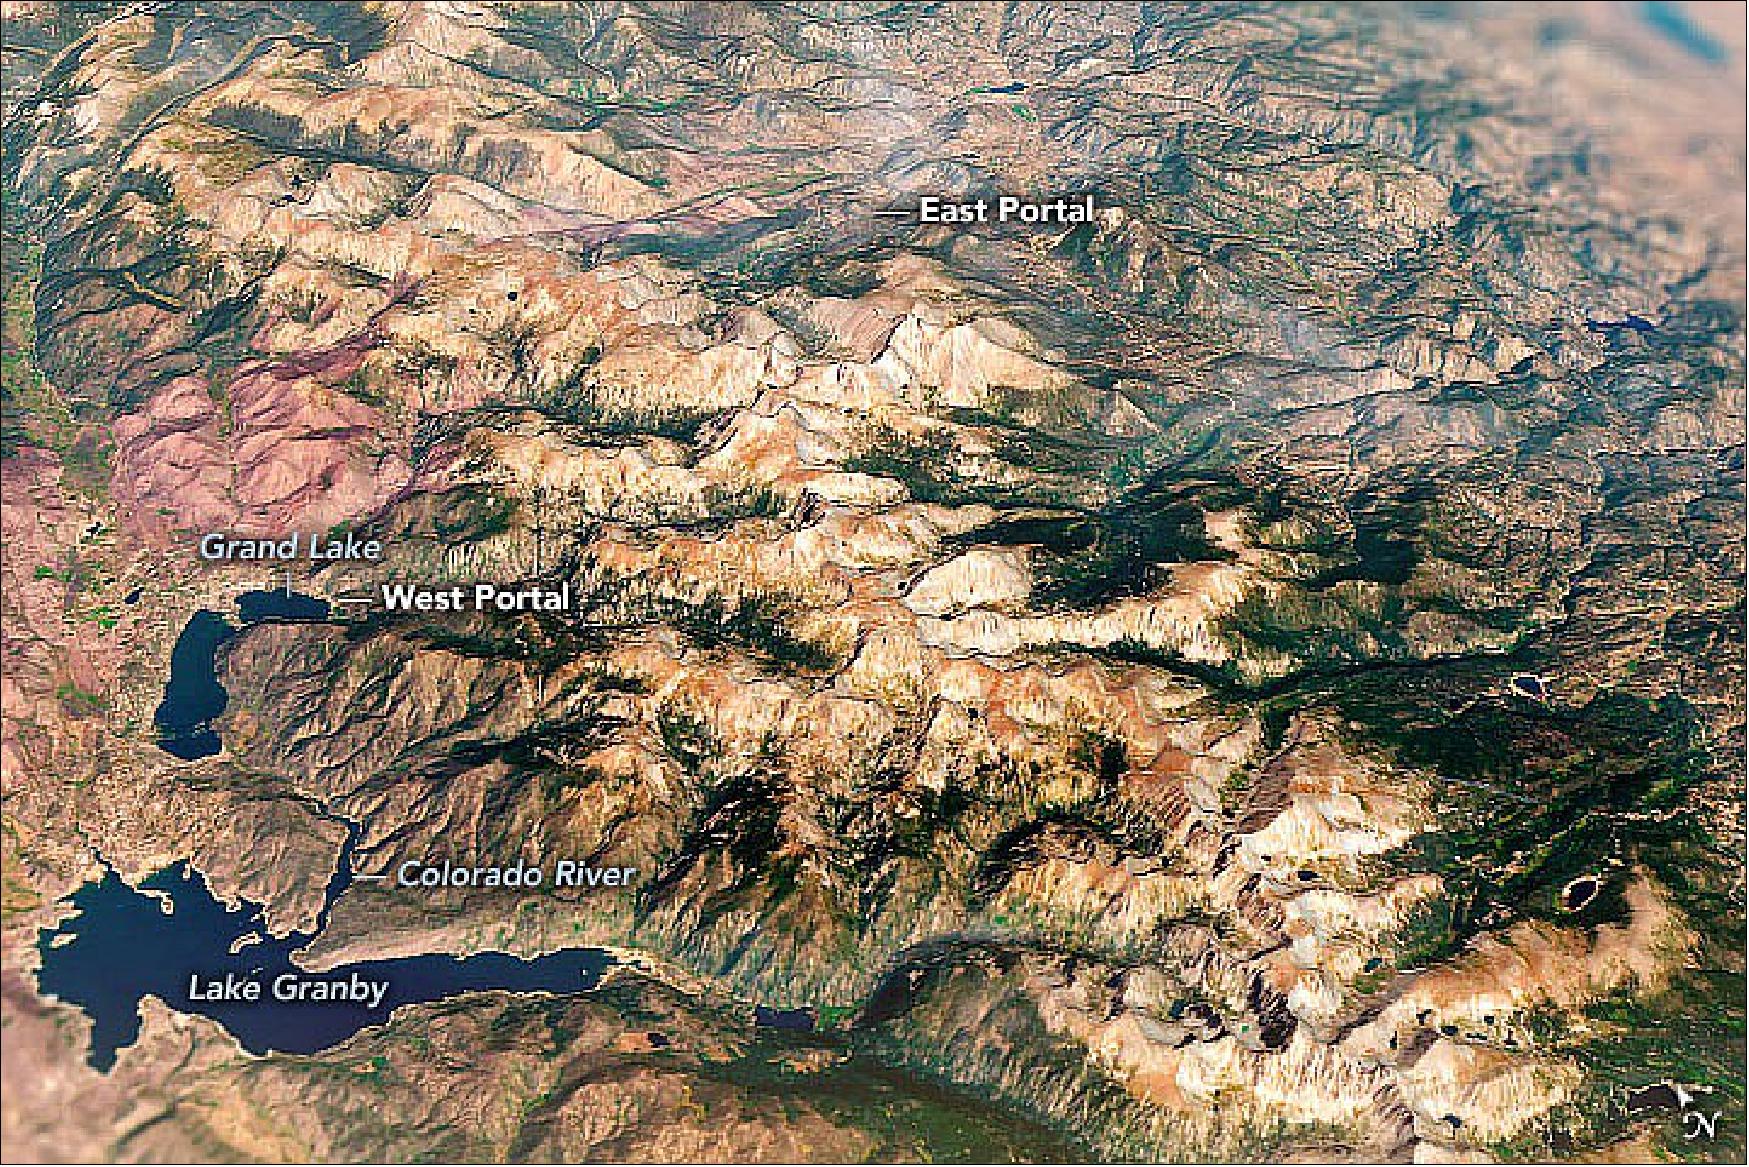 Figure 31: The portals are visible in this image, which was acquired on September 2, 2021, with the Operational Land Imager (OLI) on Landsat 8 and overlain with topographic data from the Shuttle Radar Topography Mission (SRTM) [image credit: NASA Earth Observatory images by Joshua Stevens, using Landsat data from the U.S. Geological Survey and topographic data from the Shuttle Radar Topography Mission (SRTM). Story by Sara E. Pratt]